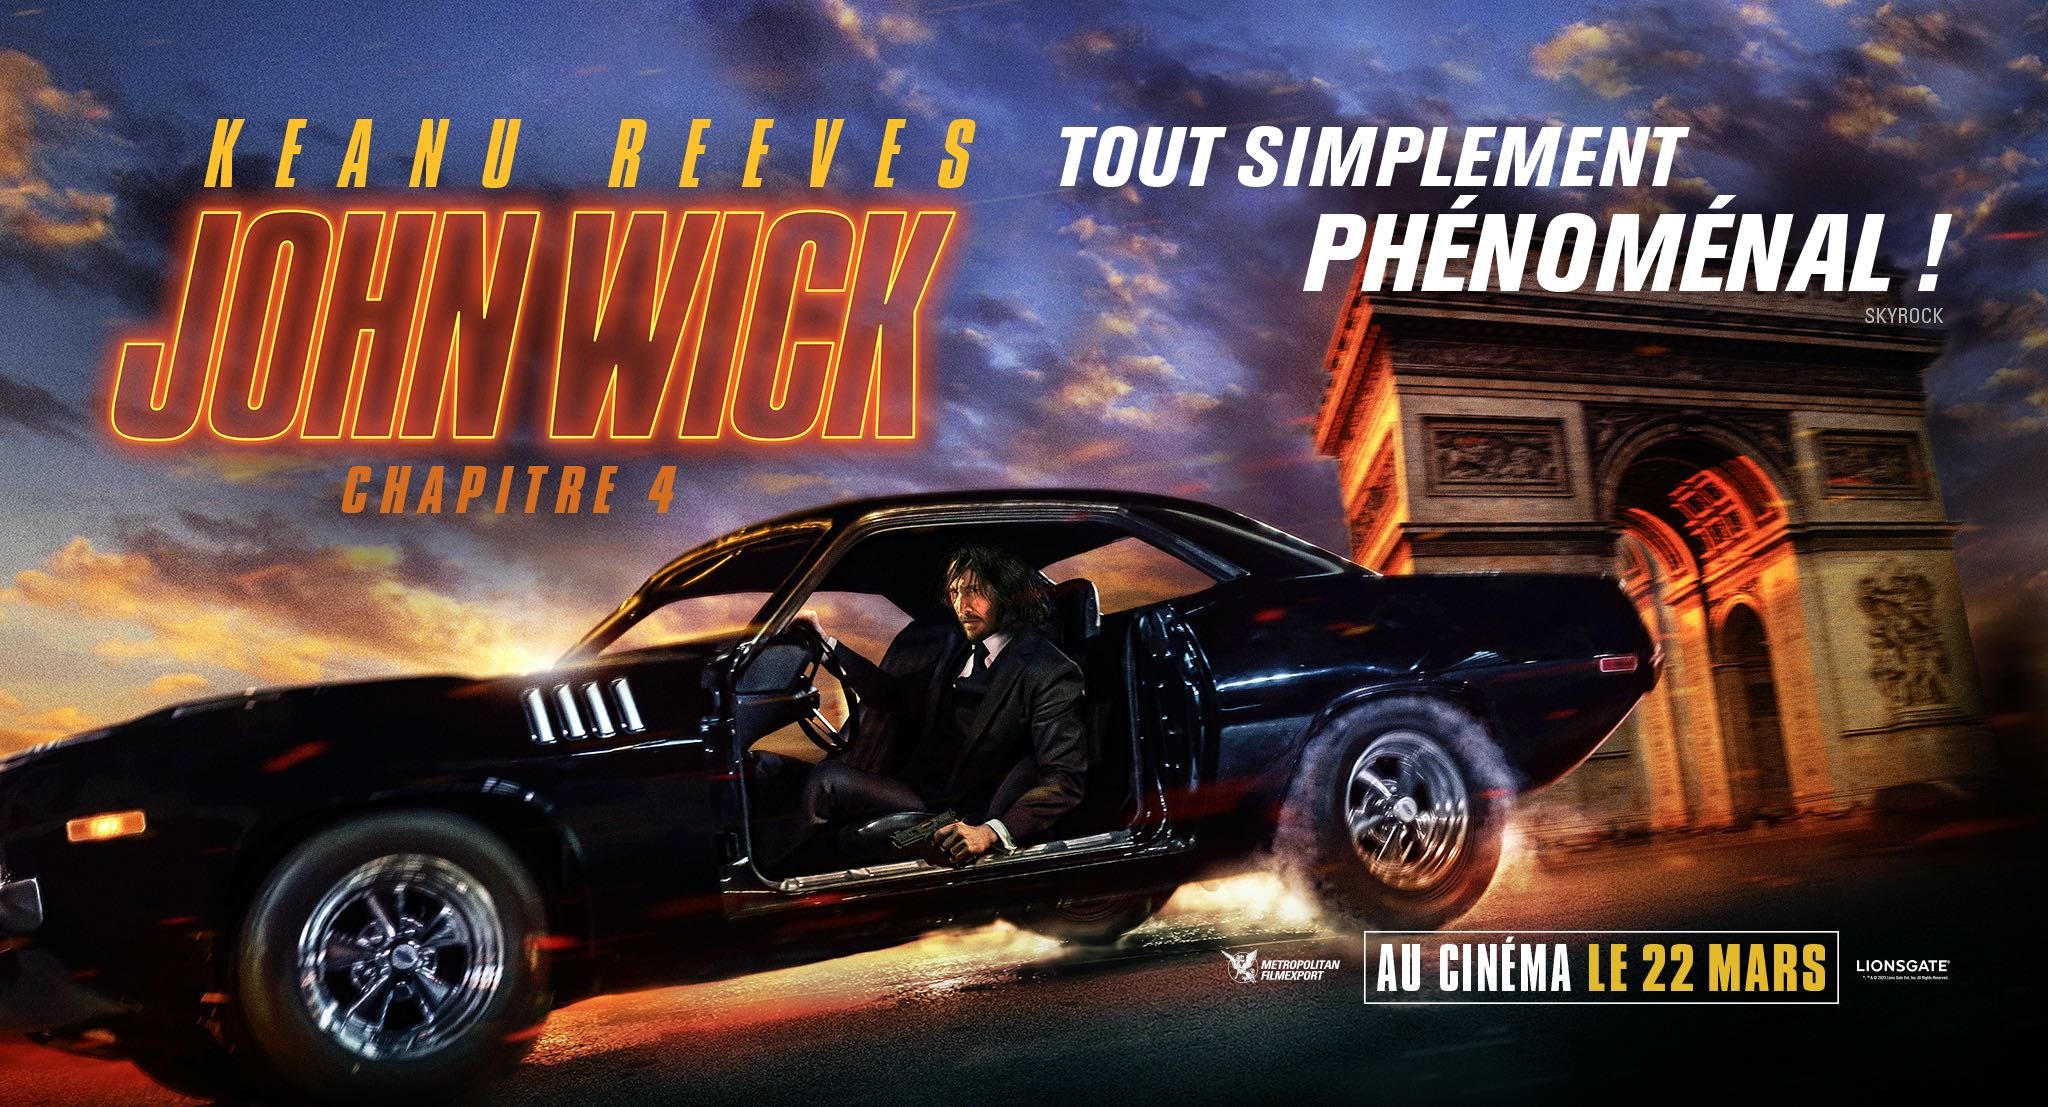 Mega Sized Movie Poster Image for John Wick: Chapter 4 (#29 of 31)